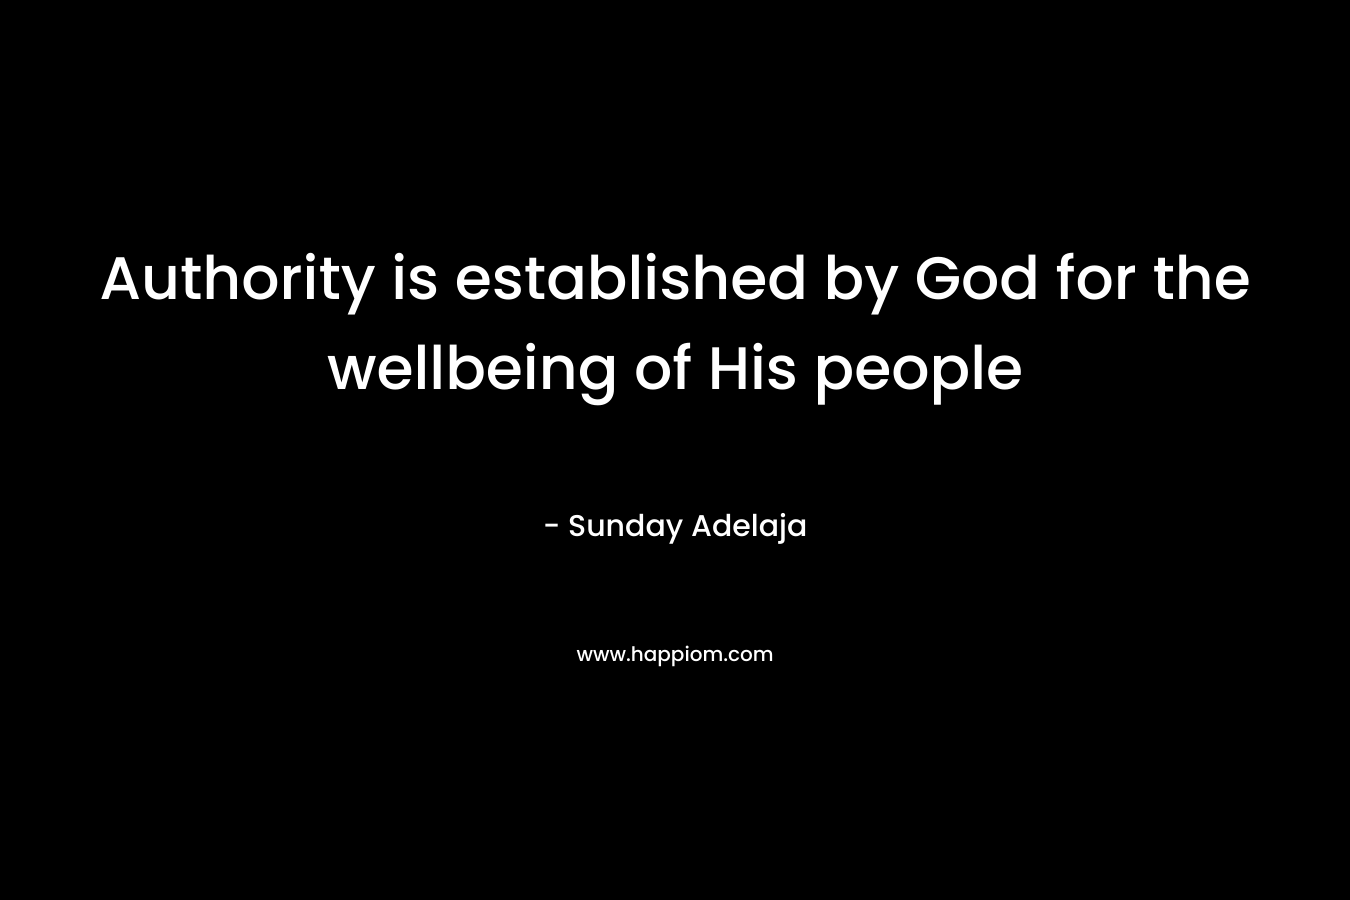 Authority is established by God for the wellbeing of His people